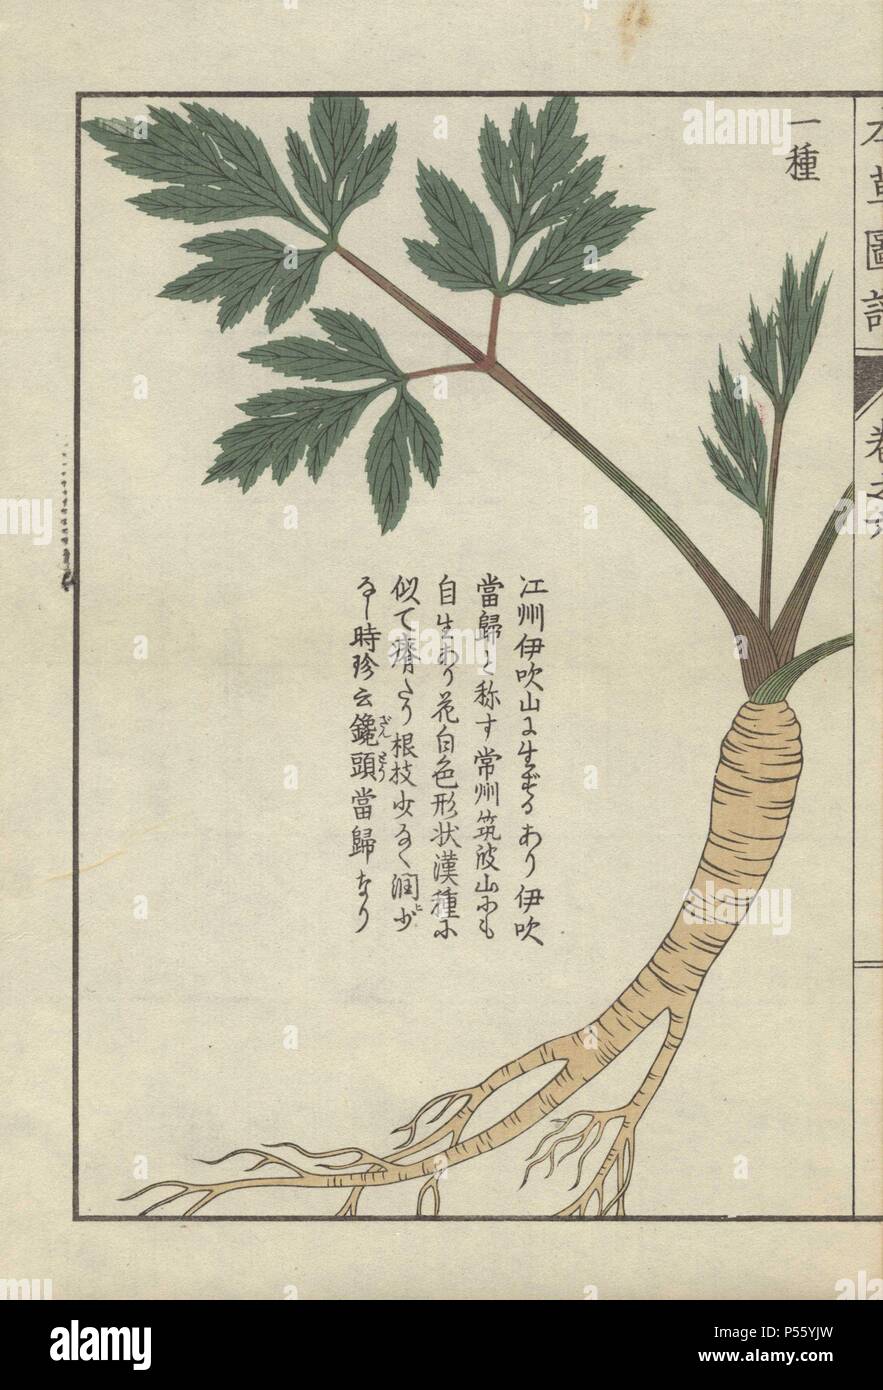 Yellow root, stem and green leaves of lovage. Ligusticum ibukiense. Ibukitouki.. Colour-printed woodblock engraving by Kan'en Iwasaki from 'Honzo Zufu,' an Illustrated Guide to Medicinal Plants, 1884. Iwasaki (1786-1842) was a Japanese botanist, entomologist and zoologist. He was one of the first Japanese botanists to incorporate western knowledge into his studies. Stock Photo